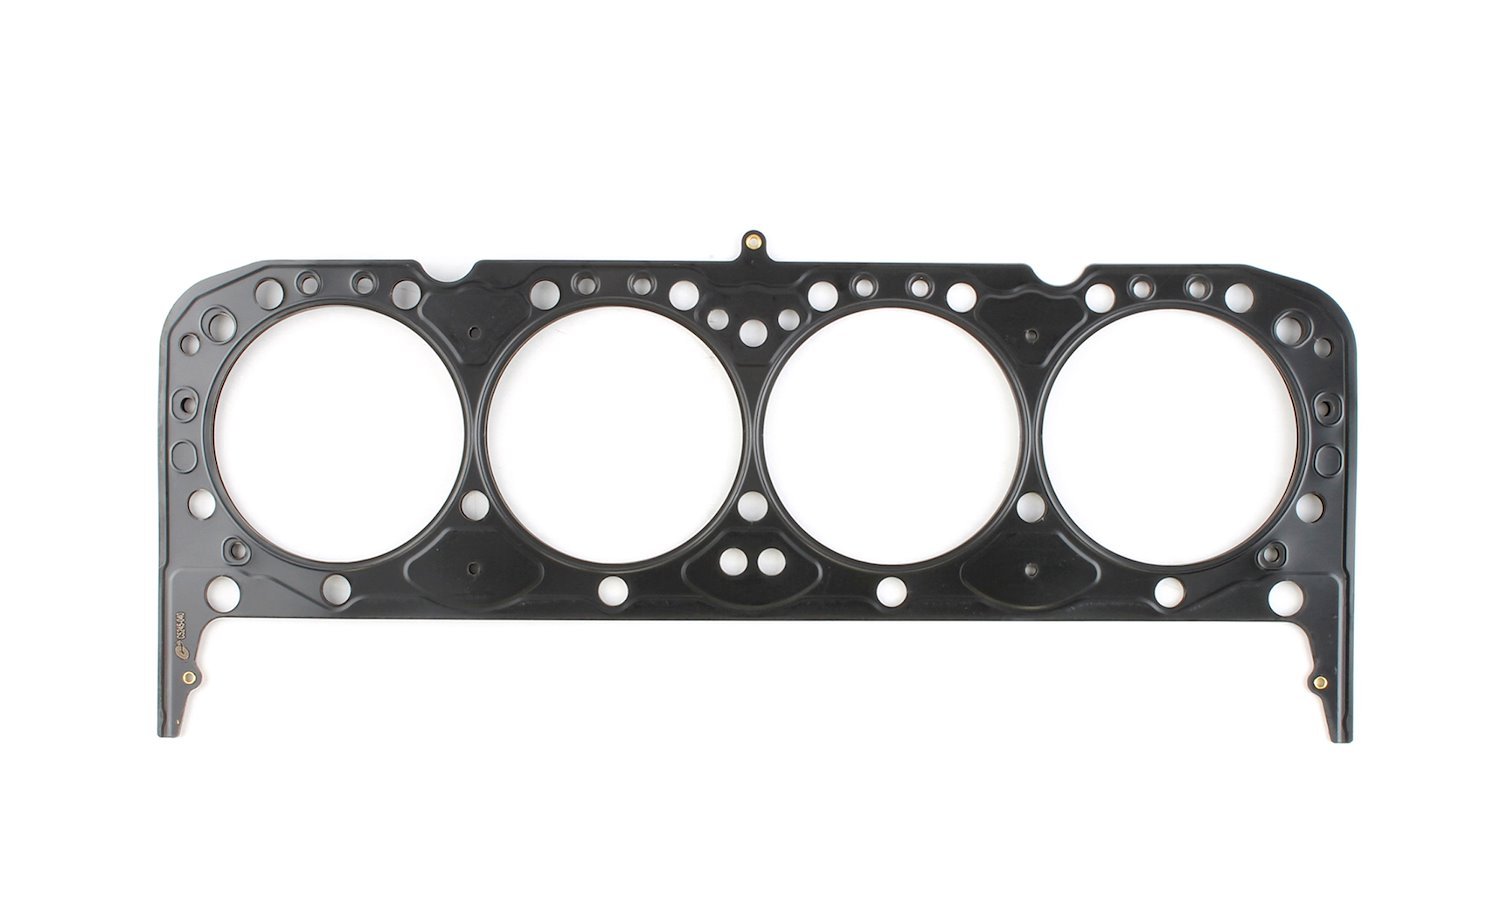 Small-Block Chevy Head Gasket for Gen I V8